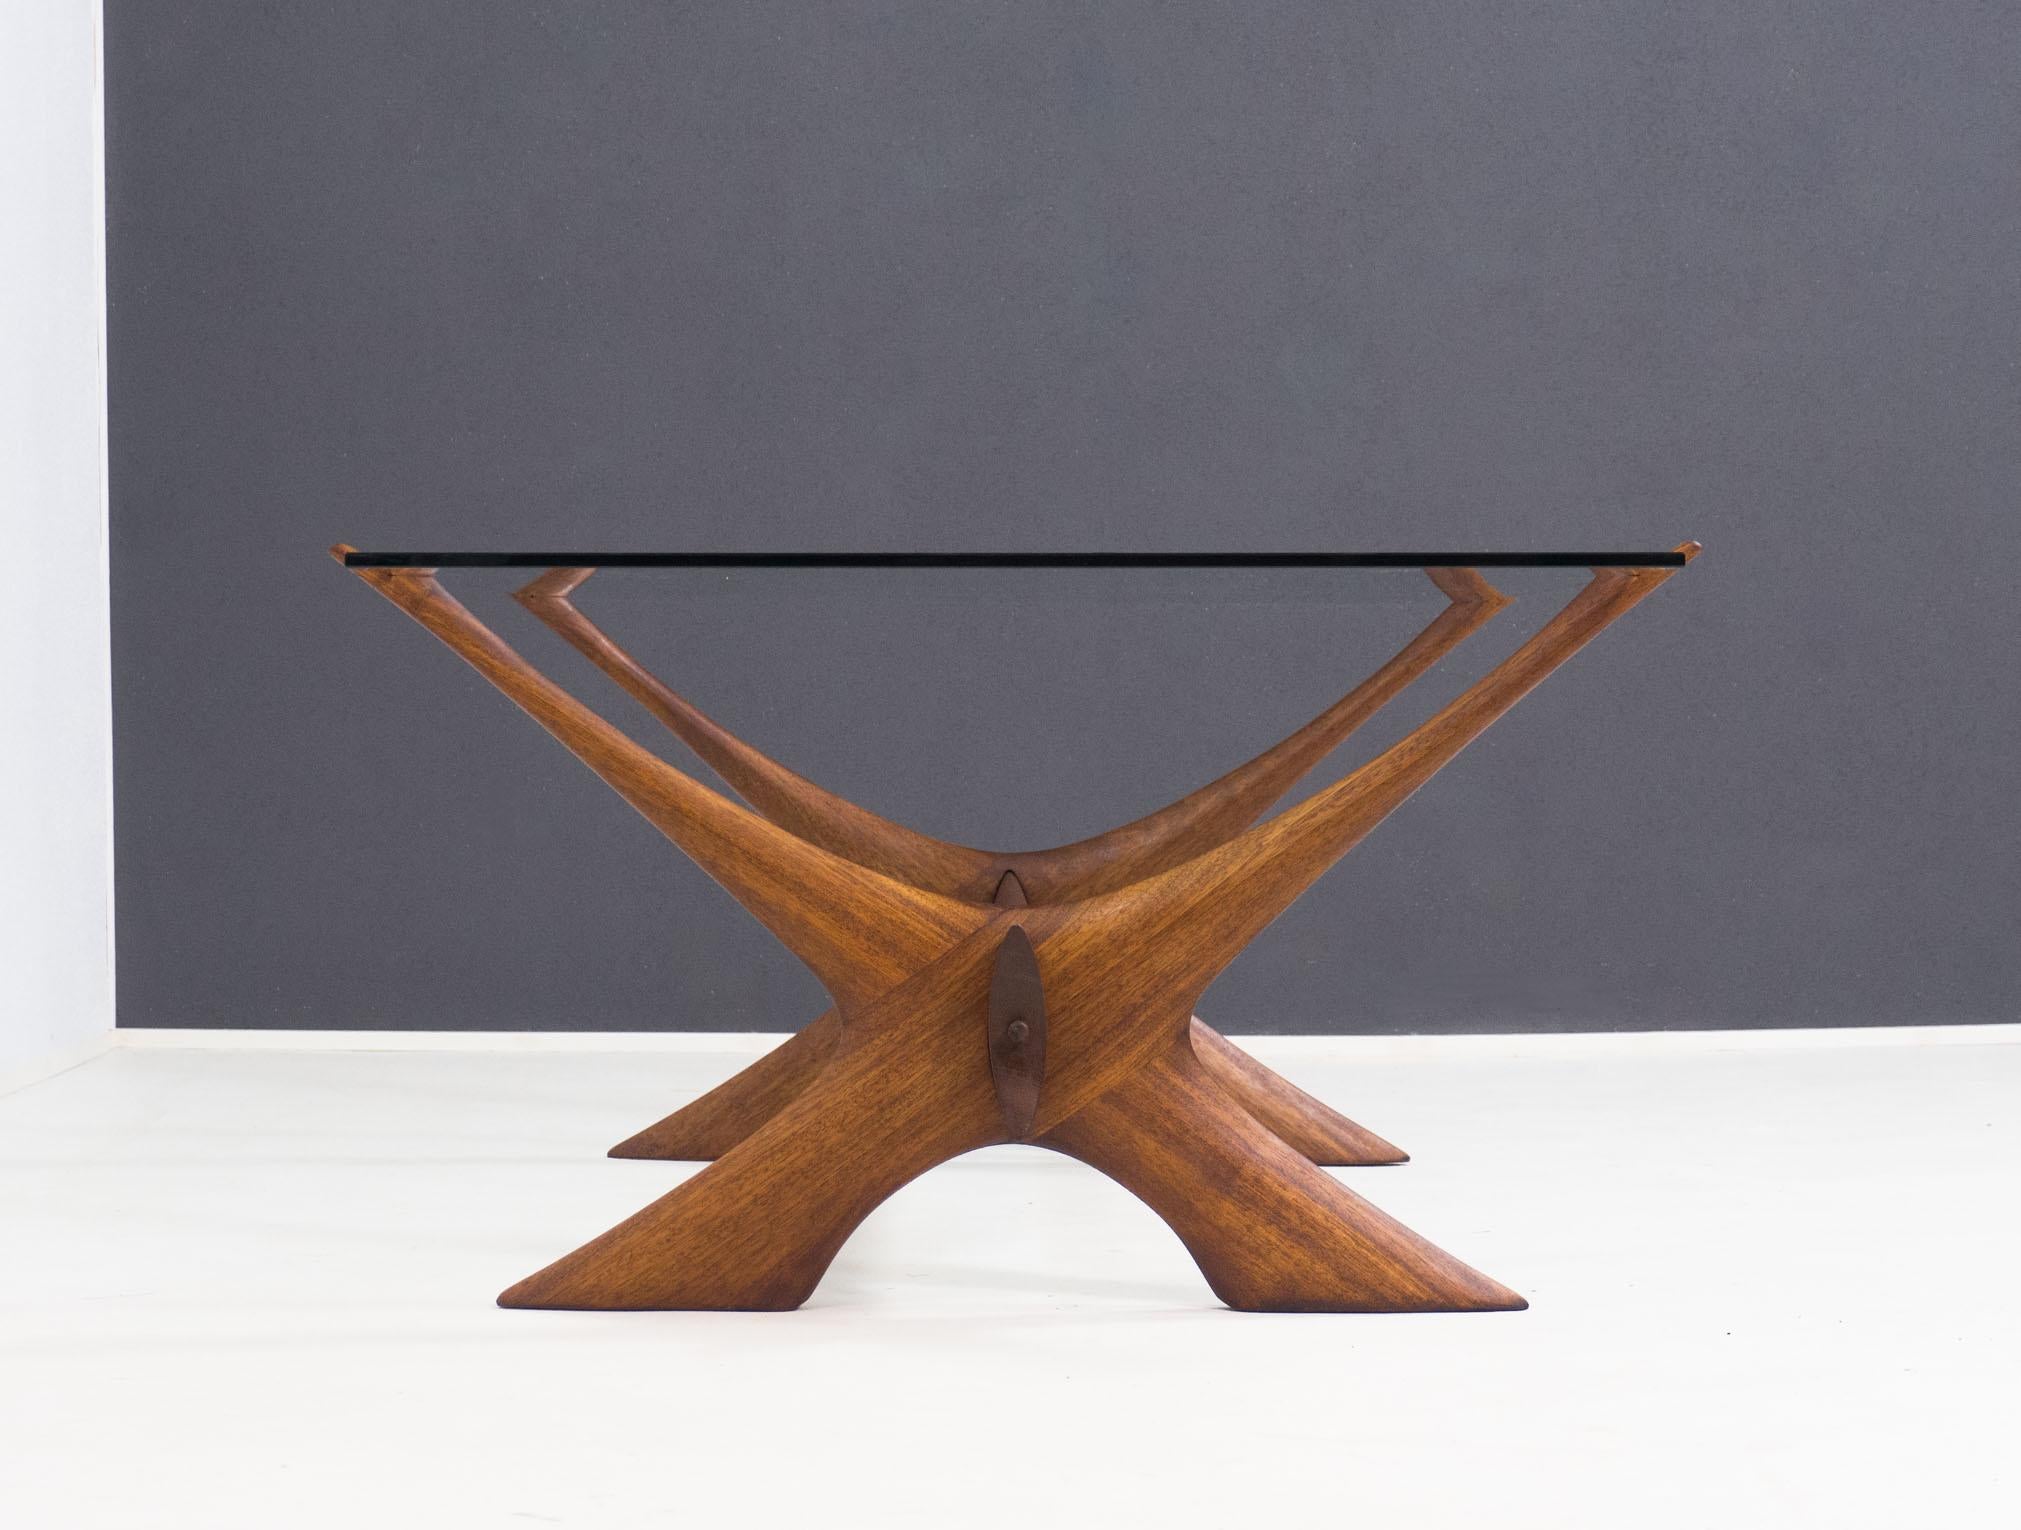 Impressive coffee table designed by Fredrik Schriever-Abeln and made by Örebro Glas of Sweden in the 1960s.

This coffee table that is known as ‘Condor’ is made from a solid walnut X-shaped base that carries a 1 cm thick clear glass plate.

The